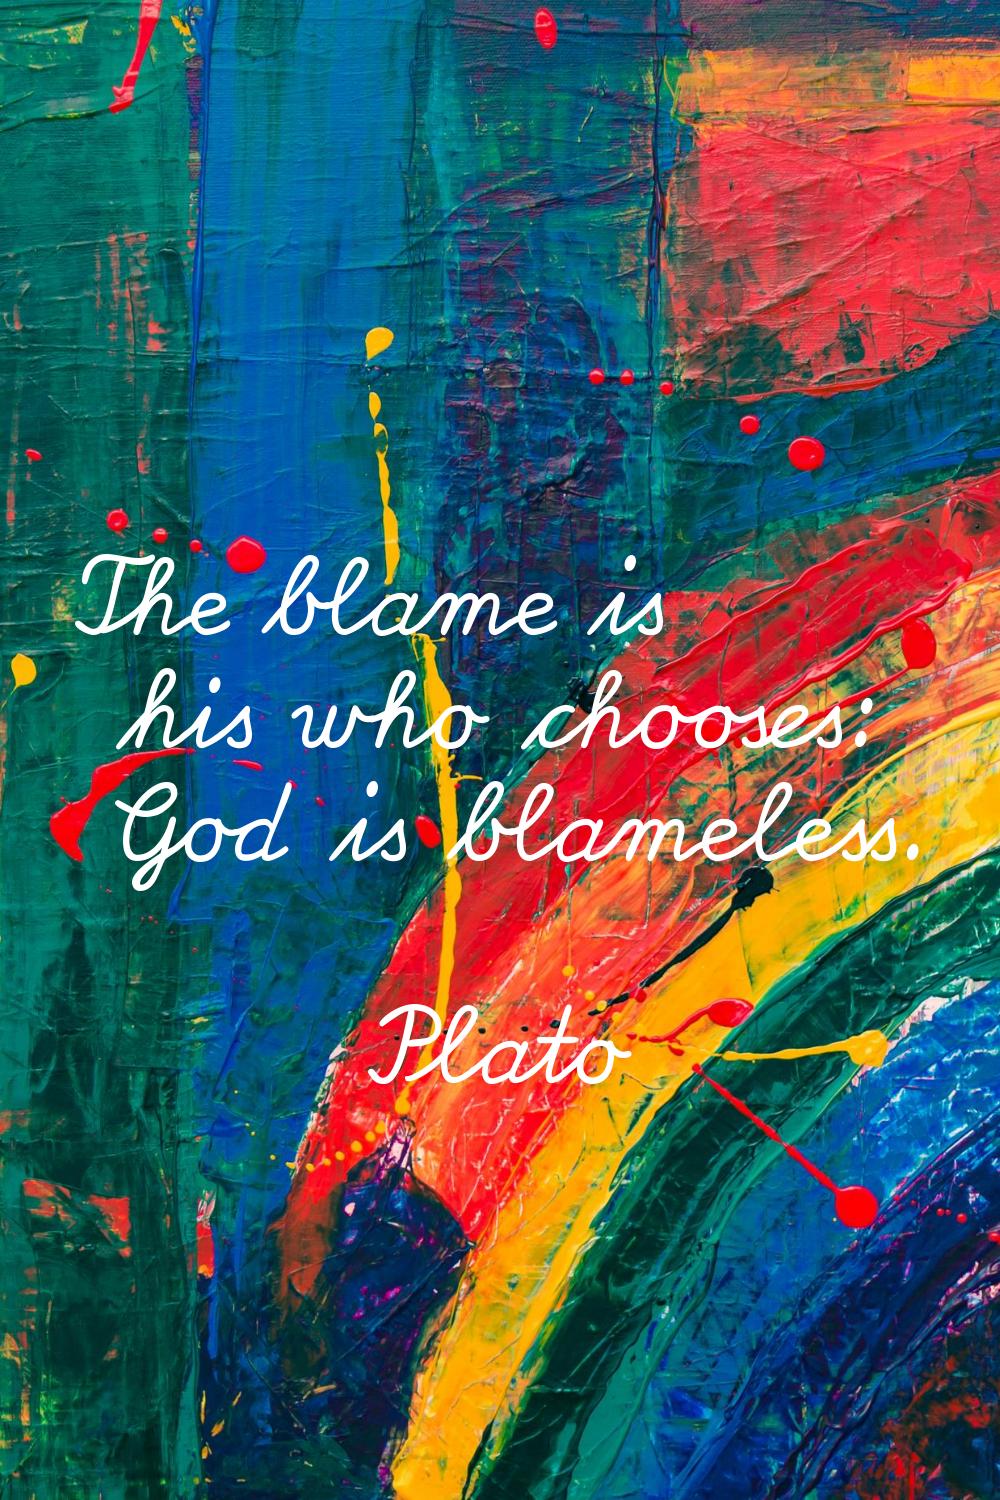 The blame is his who chooses: God is blameless.